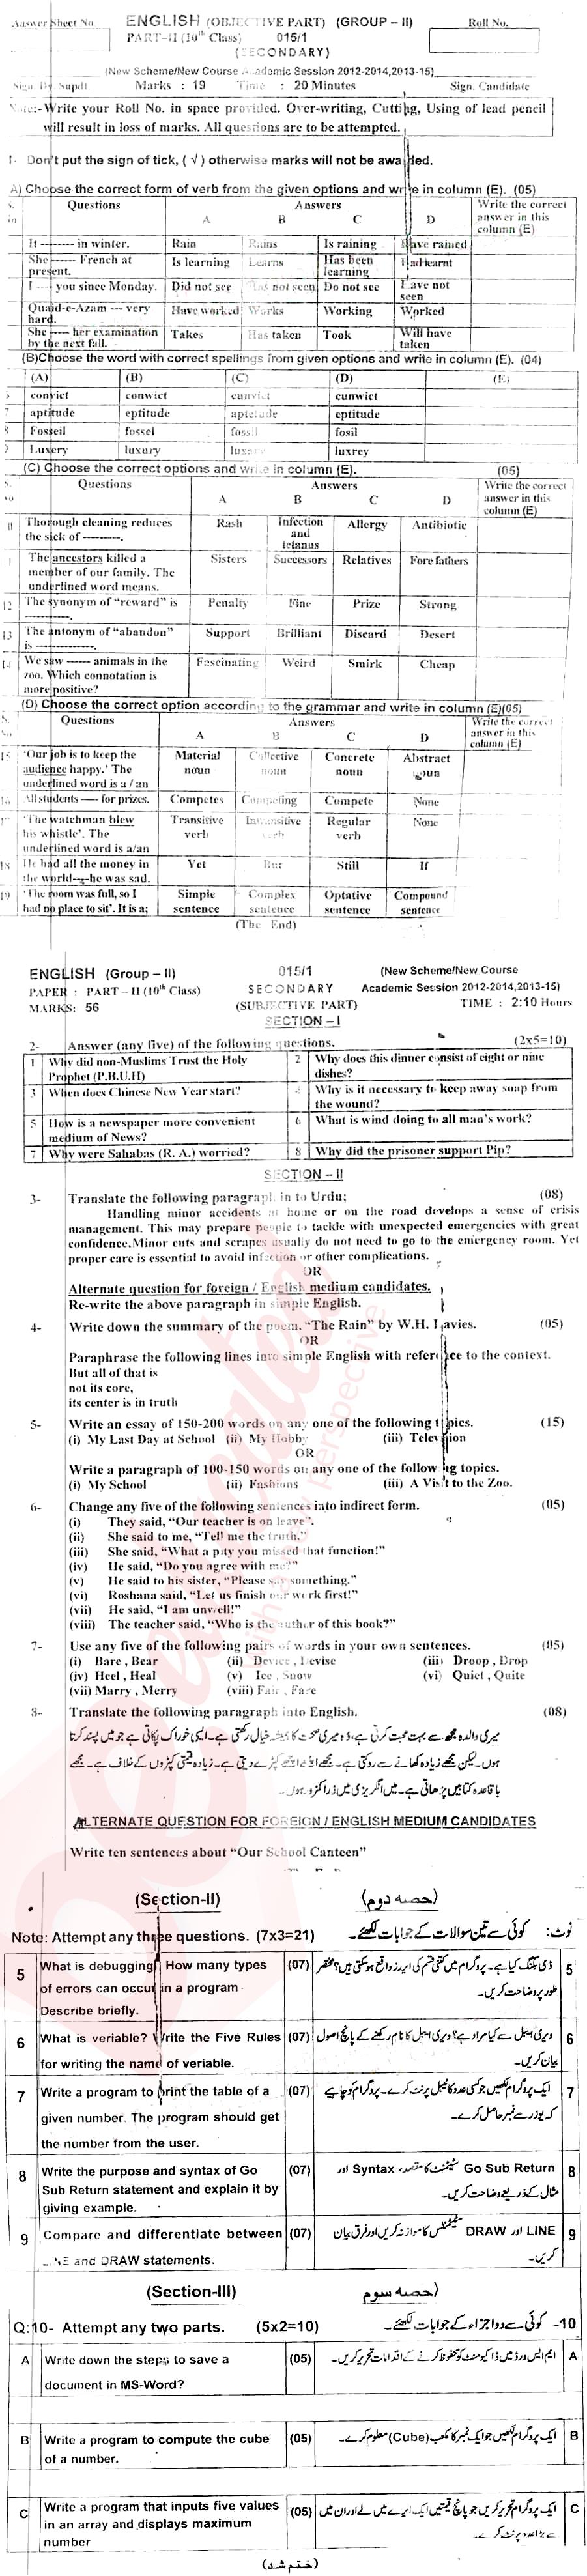 English 10th class Past Paper Group 1 BISE AJK 2015